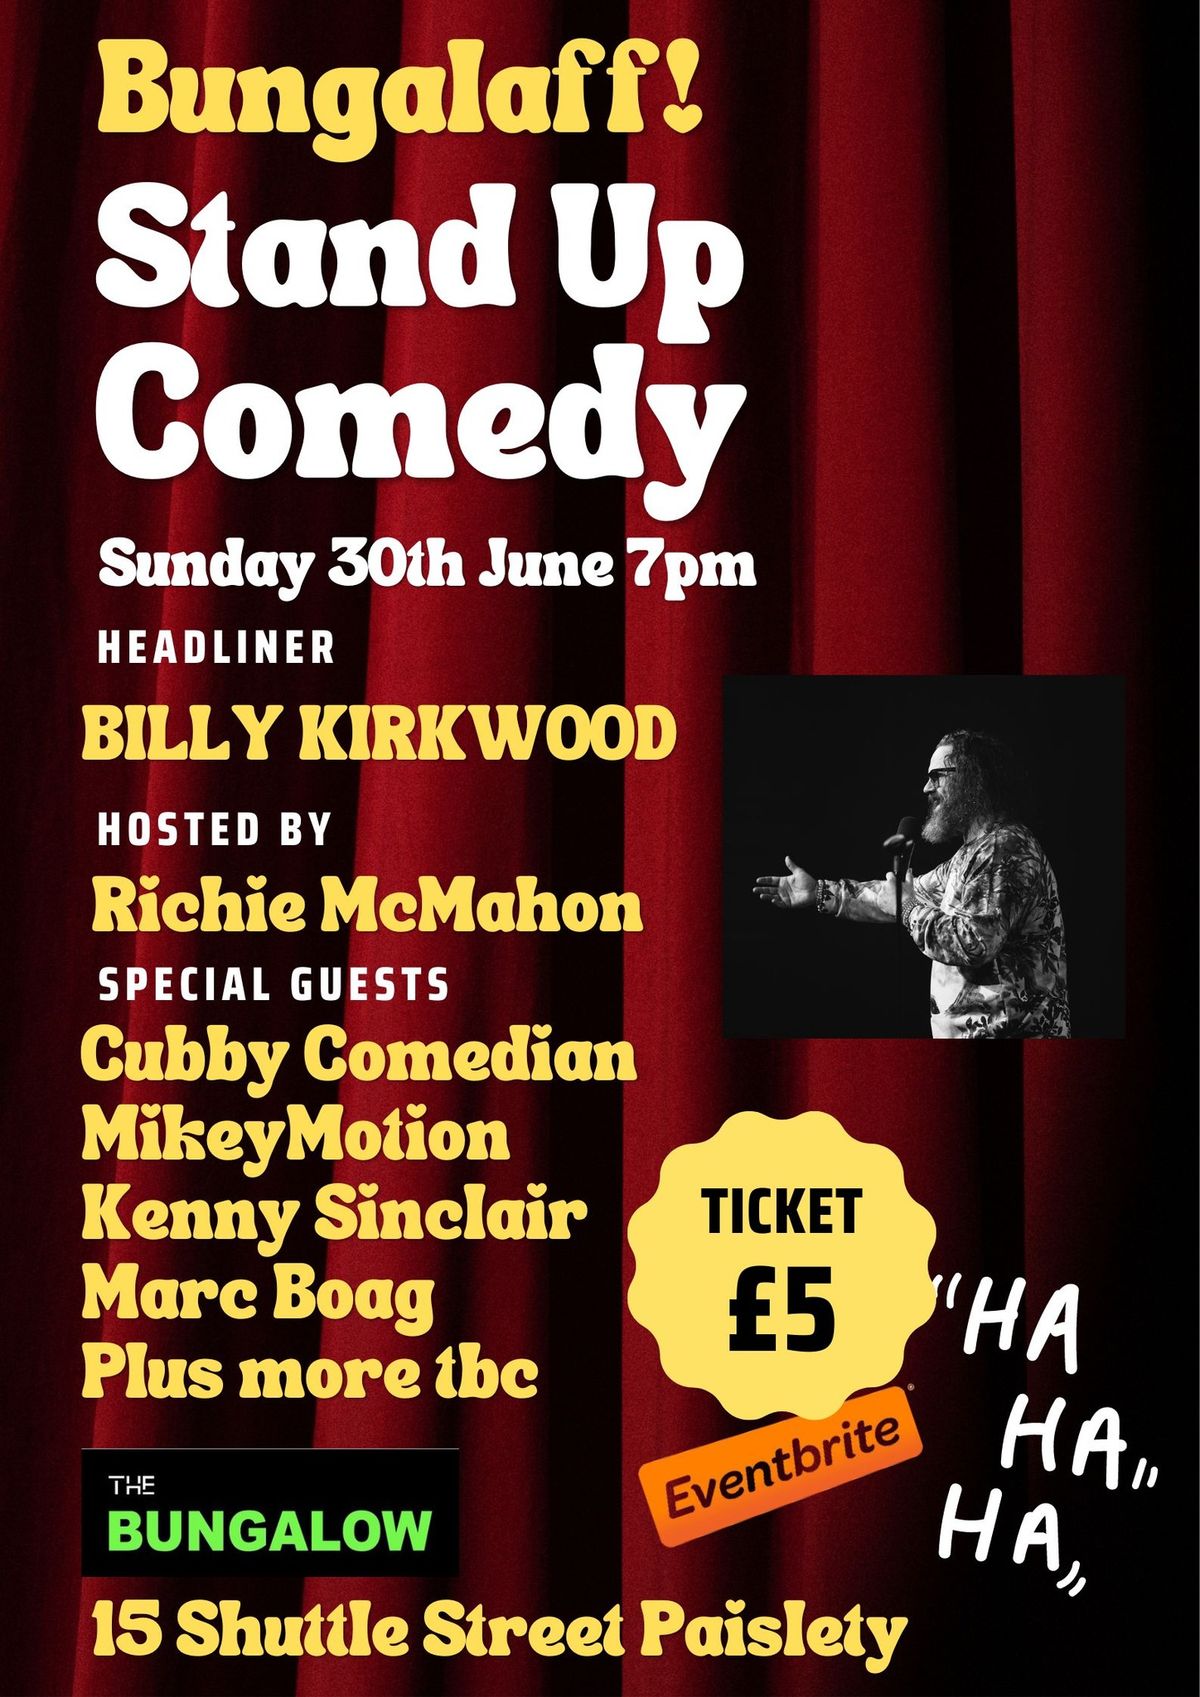 BUNGALAFF Comedy Featuring BILLY KIRKWOOD and guests